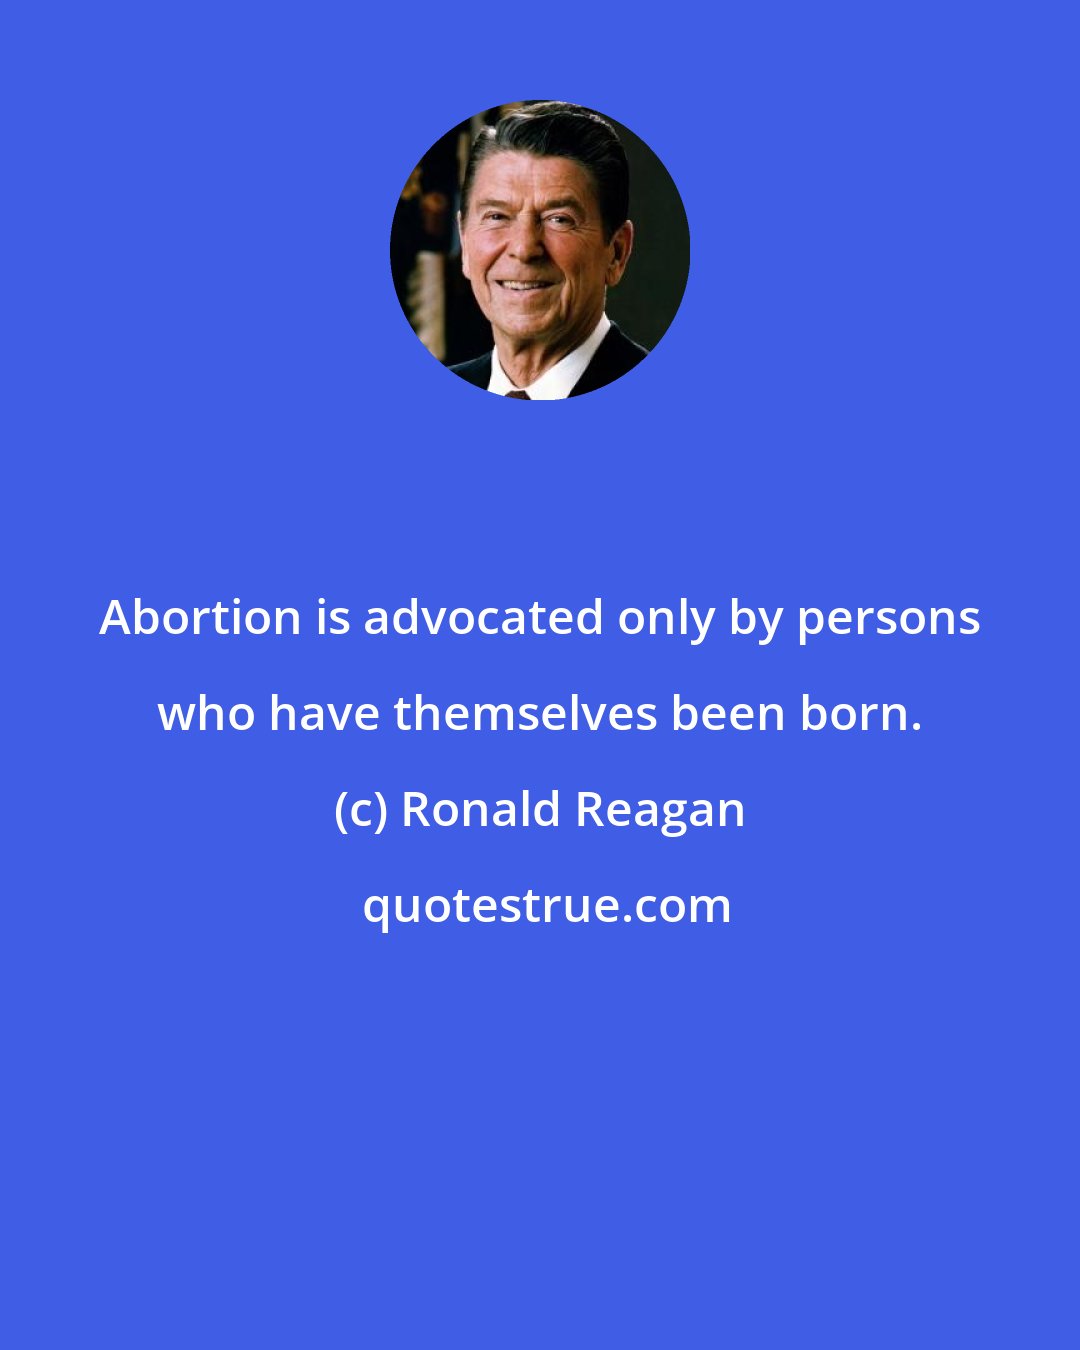 Ronald Reagan: Abortion is advocated only by persons who have themselves been born.